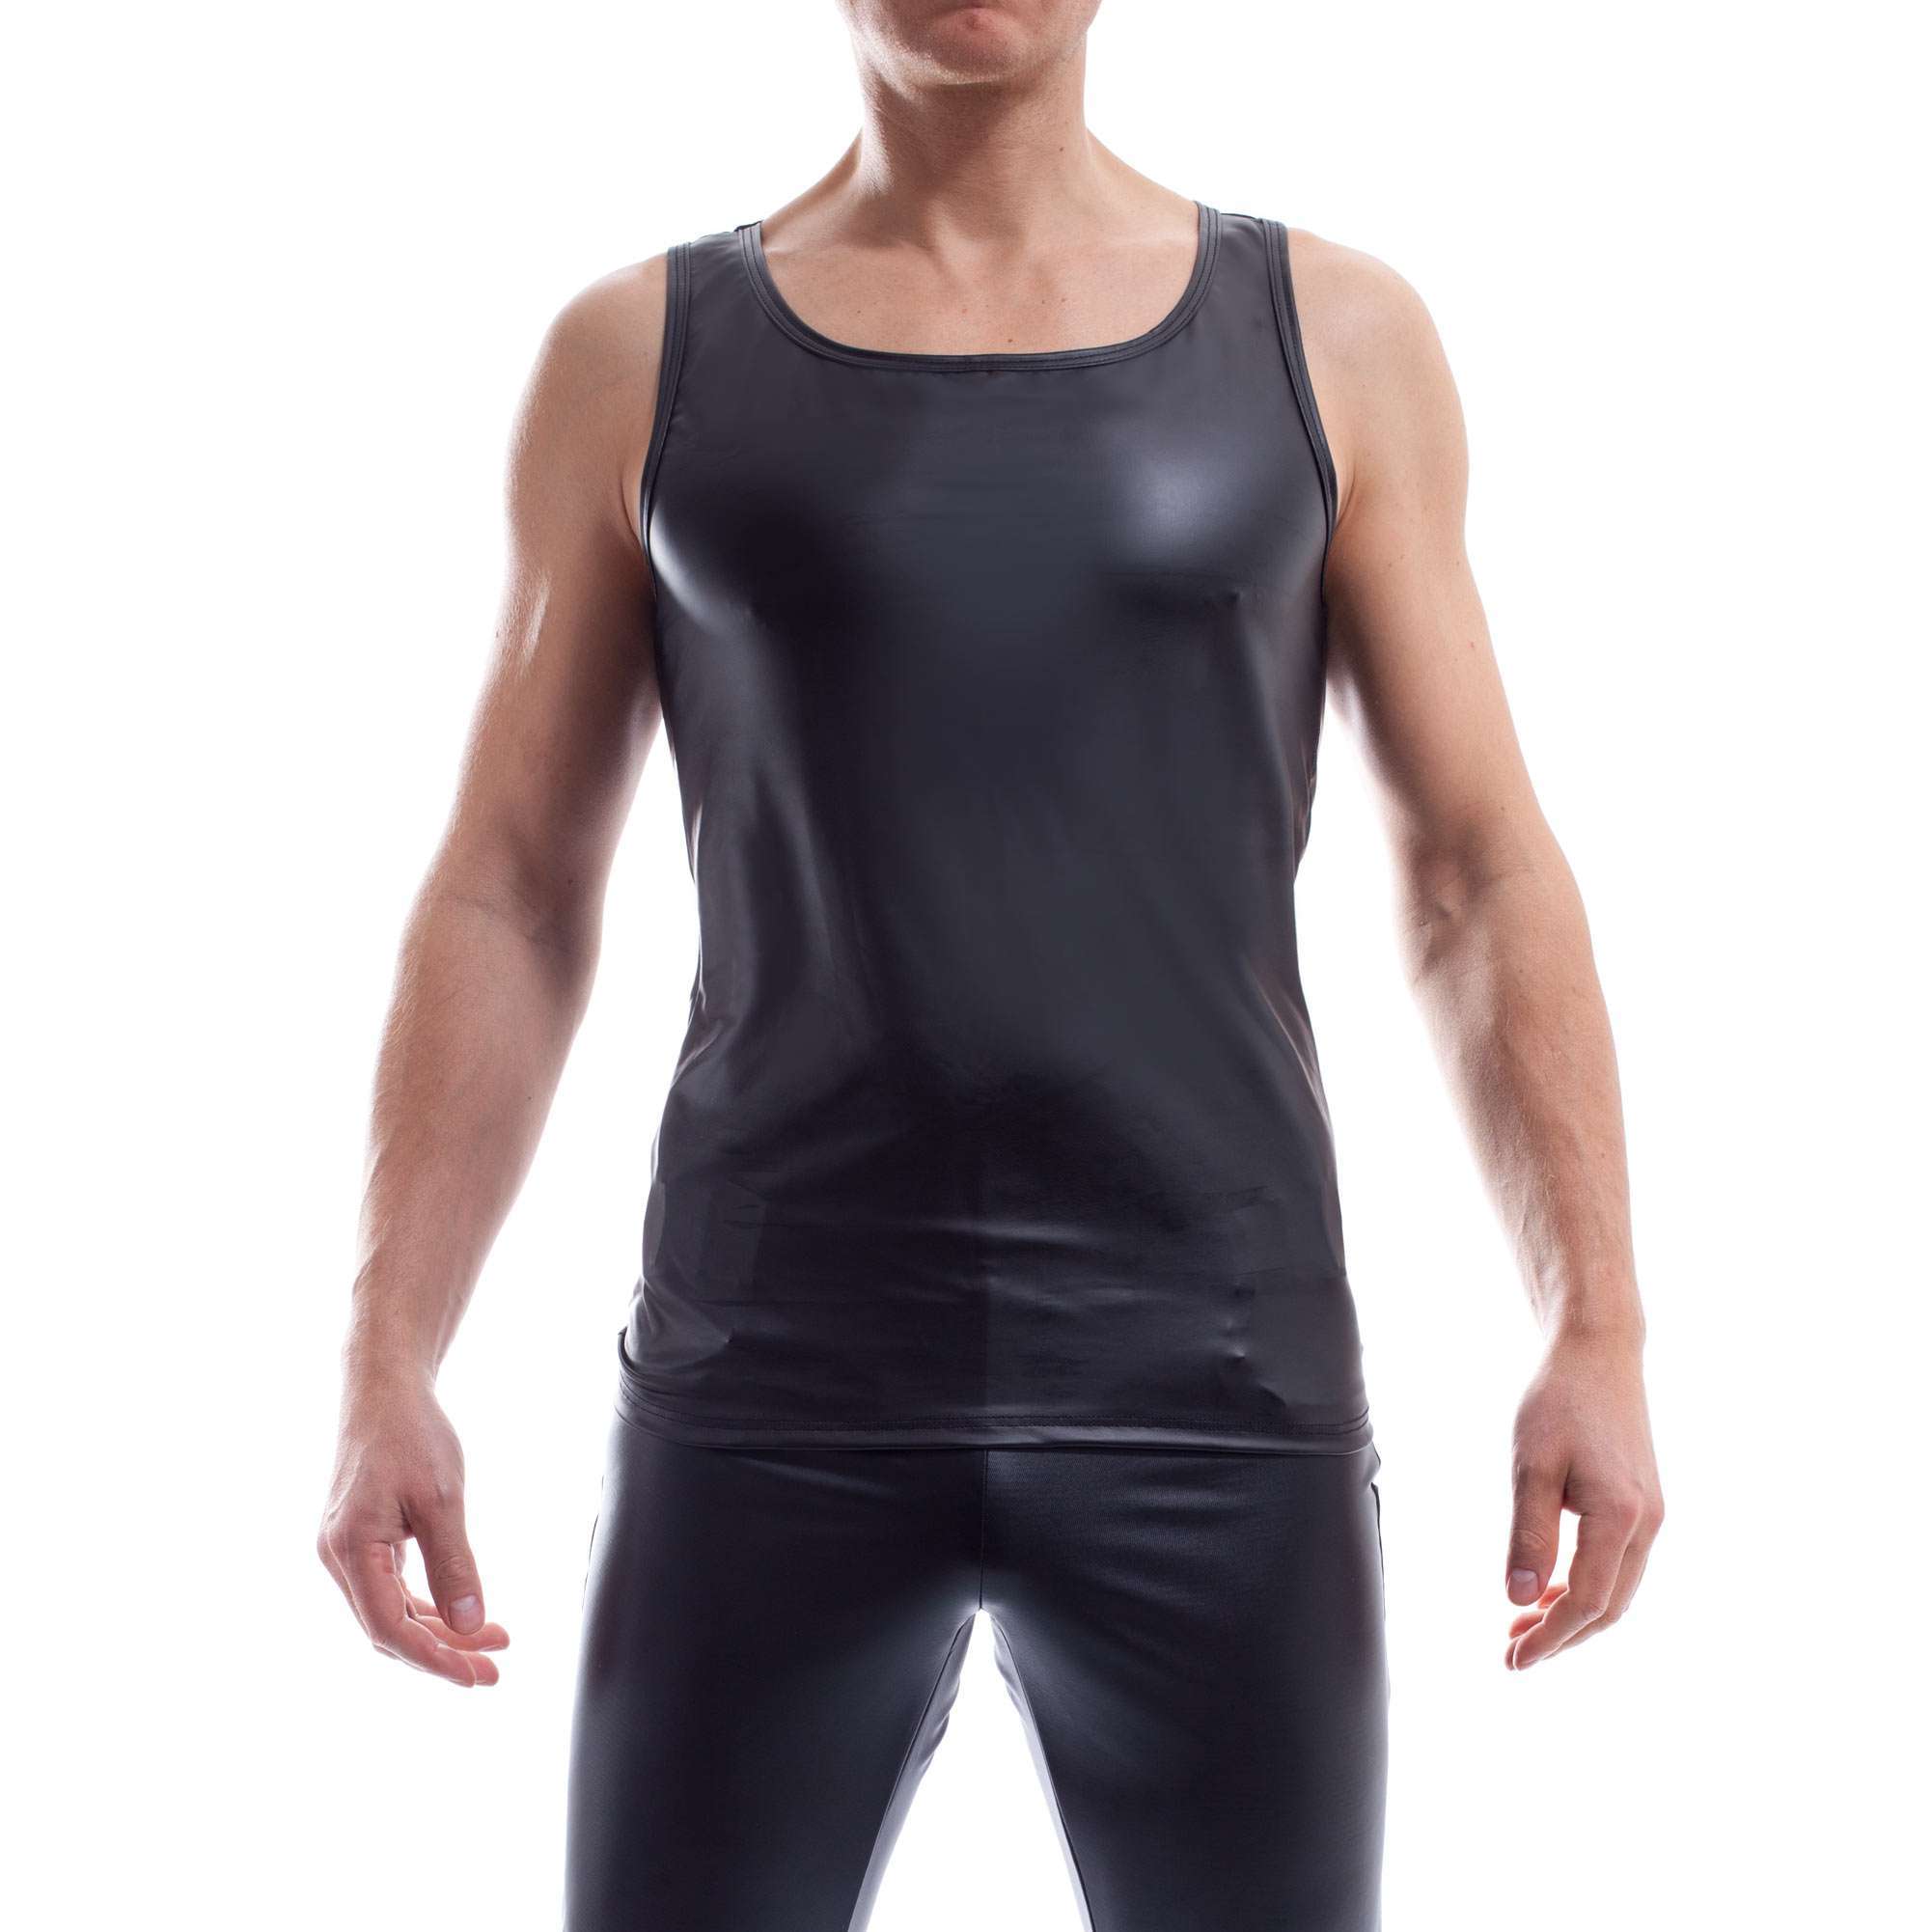 Leatherlike Muscleshirt

Sizes

Available in sizes S |M |L |XL| XXL | XXXL

Material composition

Leather like: 92% polyester | 8% elastane

Particularities

LIVE product | matt fine leather like | pleasantly elastic | high quality | Made in Germany

Wash instructions

Hand wash

Leatherlike Mauscleshirt


 

Click here for the…